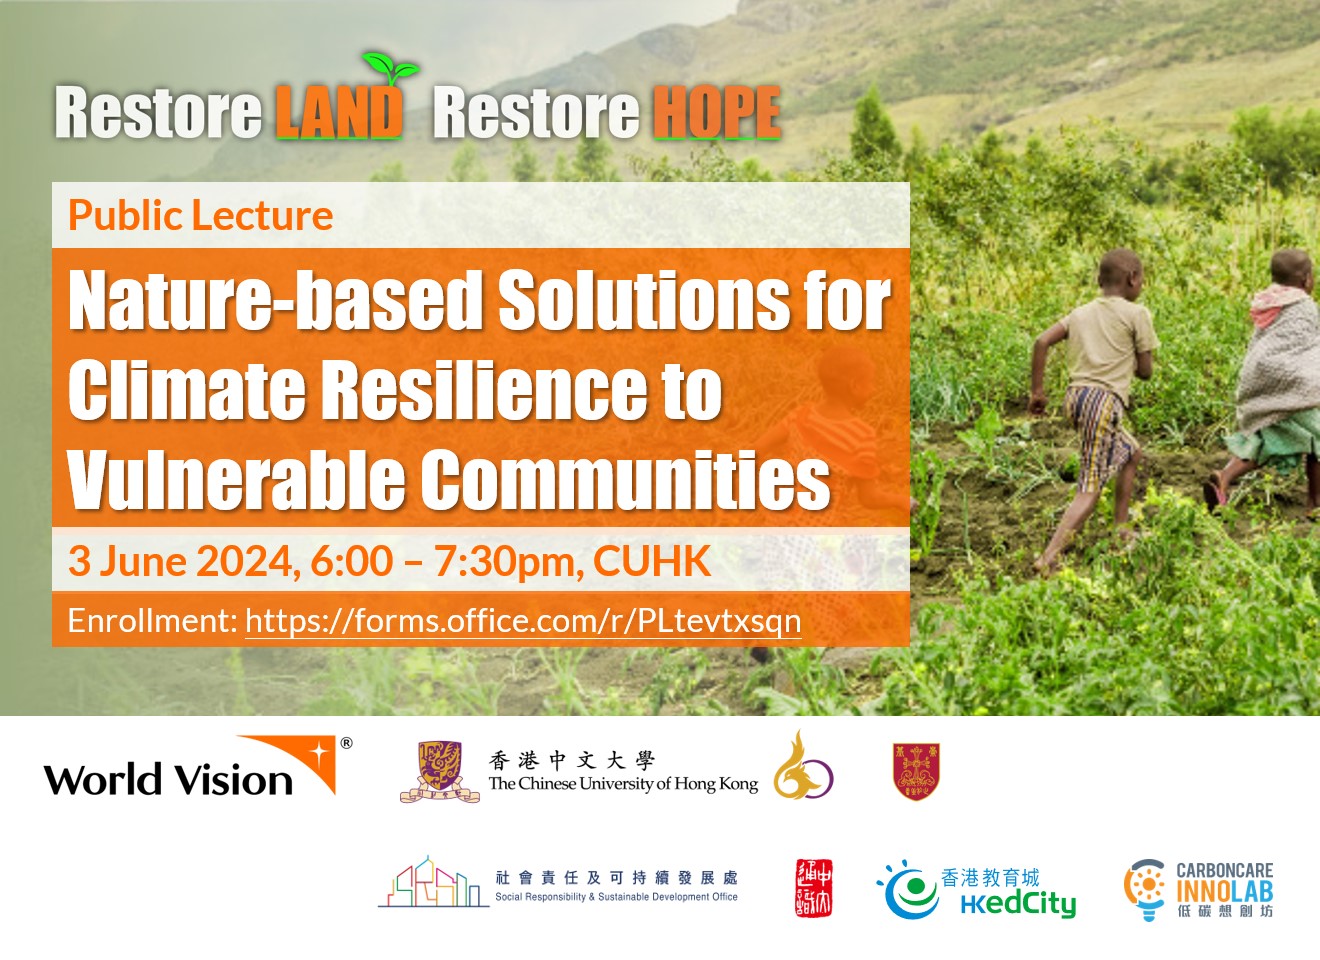 ‘Nature-based Solutions for Climate Resilience to Vulnerable Communities” Public Lecture